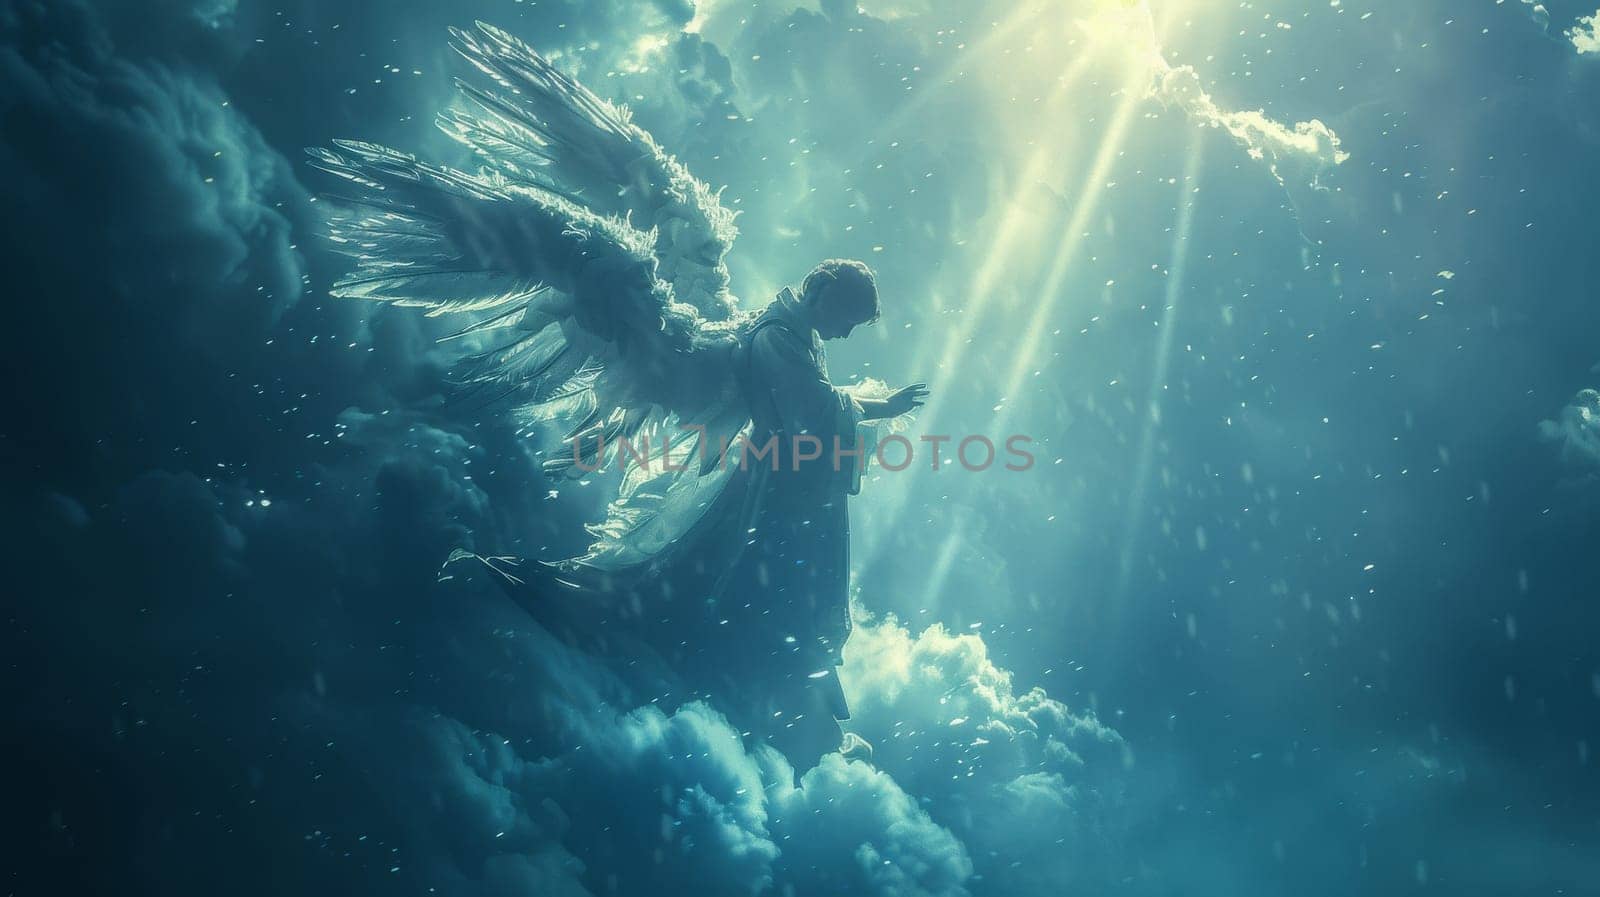 A beautiful angel is flying in the sky with a bright sun shining on it. The scene is peaceful and serene, with the angel appearing to be reaching out to the sun